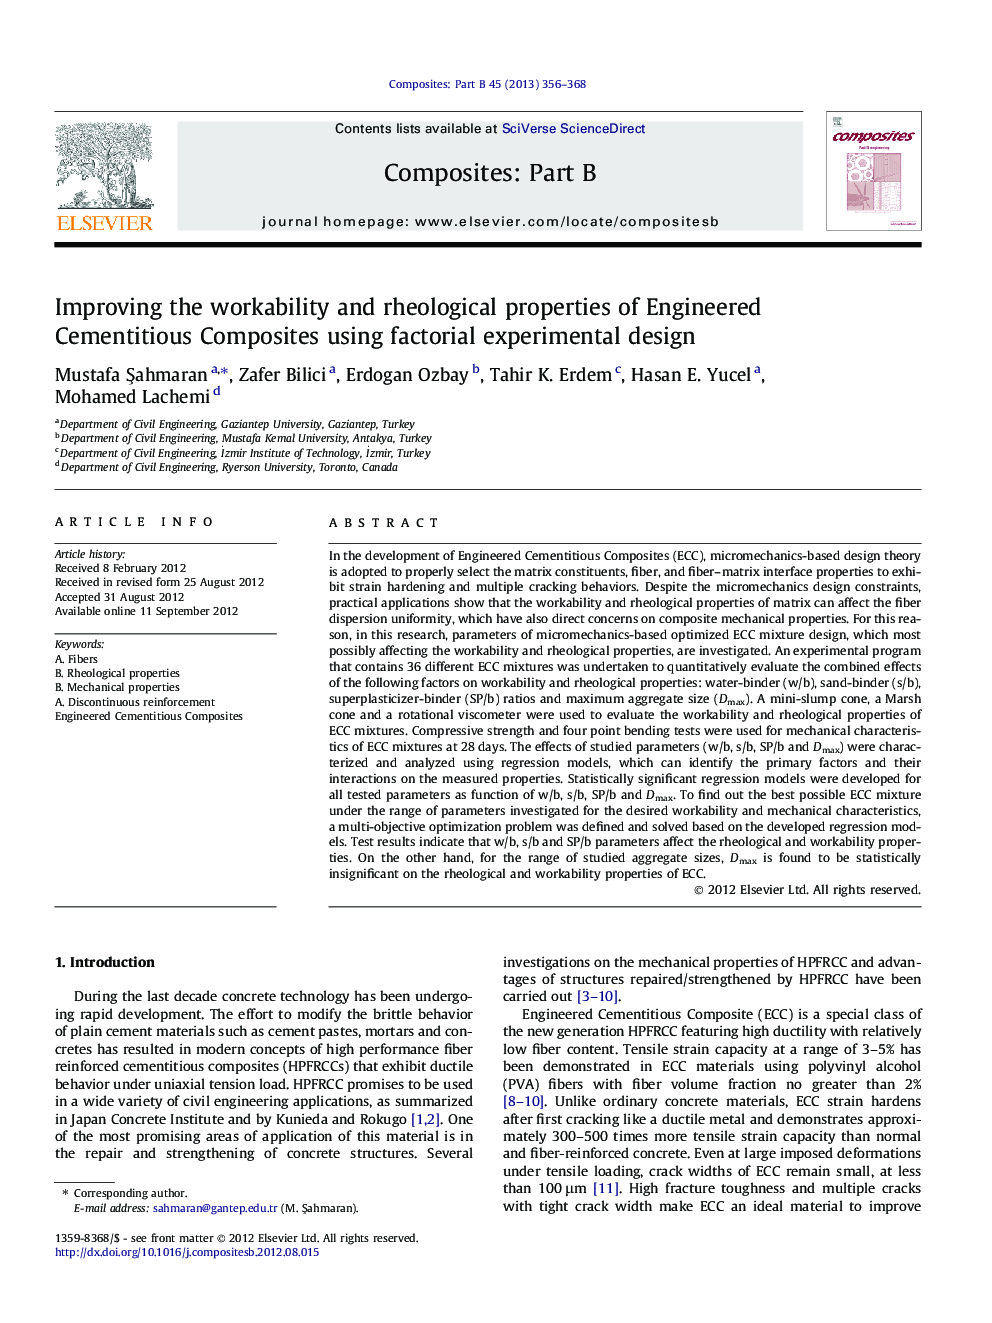 Improving the workability and rheological properties of Engineered Cementitious Composites using factorial experimental design